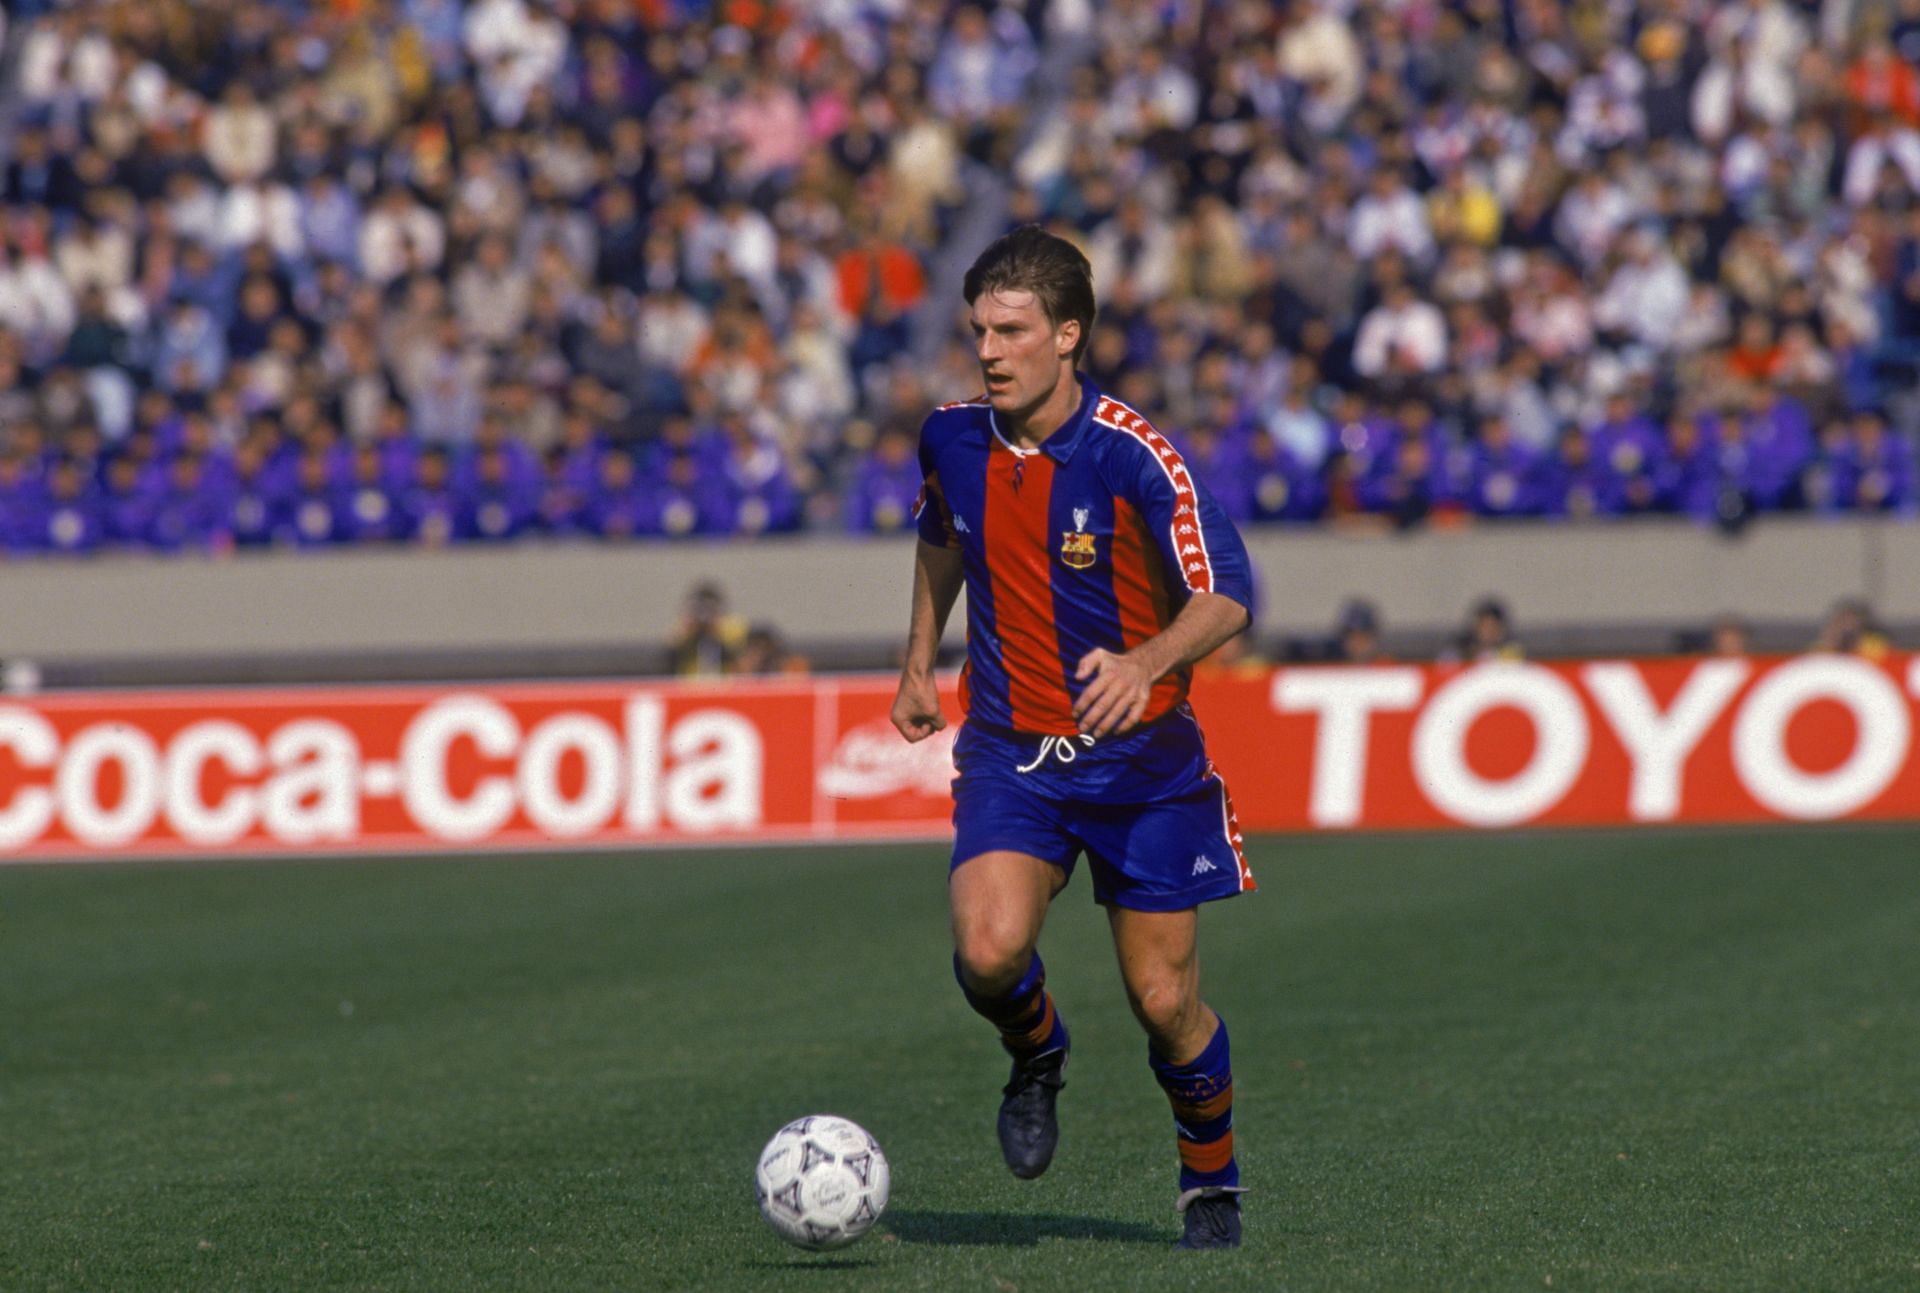 Michael Laudrup enjoyed a successful stint at Barcelona.